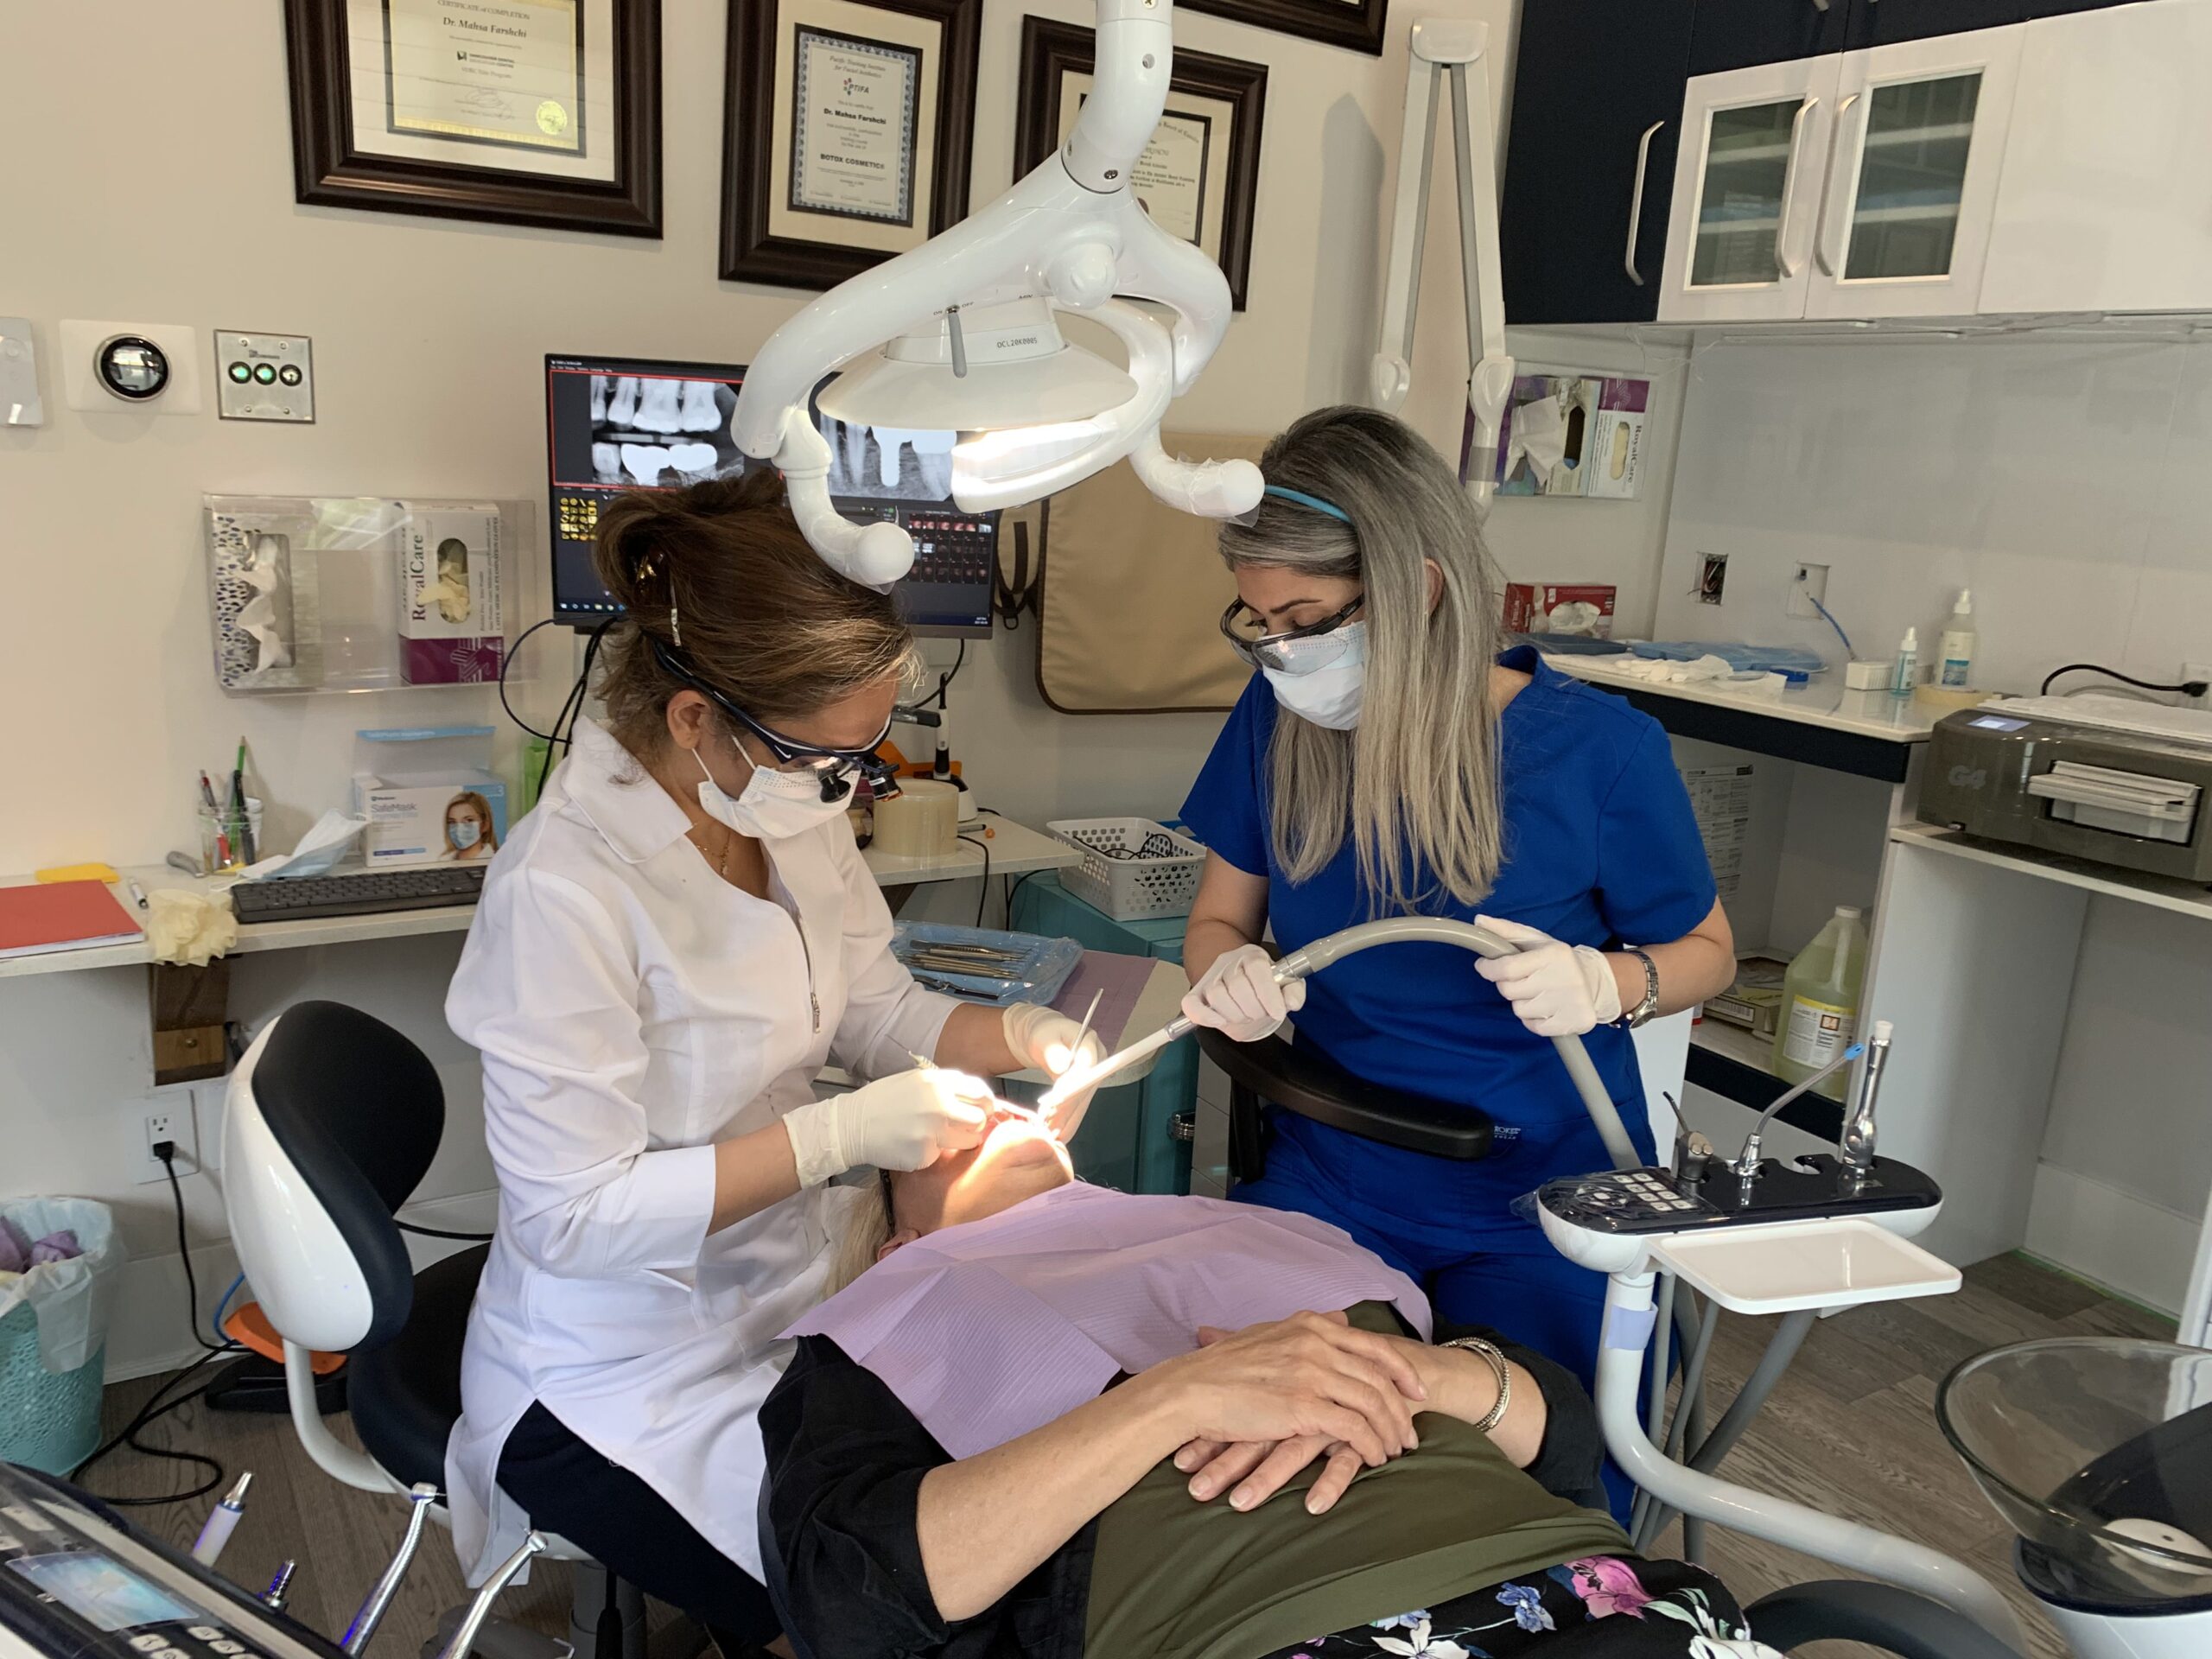 Where can I find a good, Great or best dentist in North Vancouver?